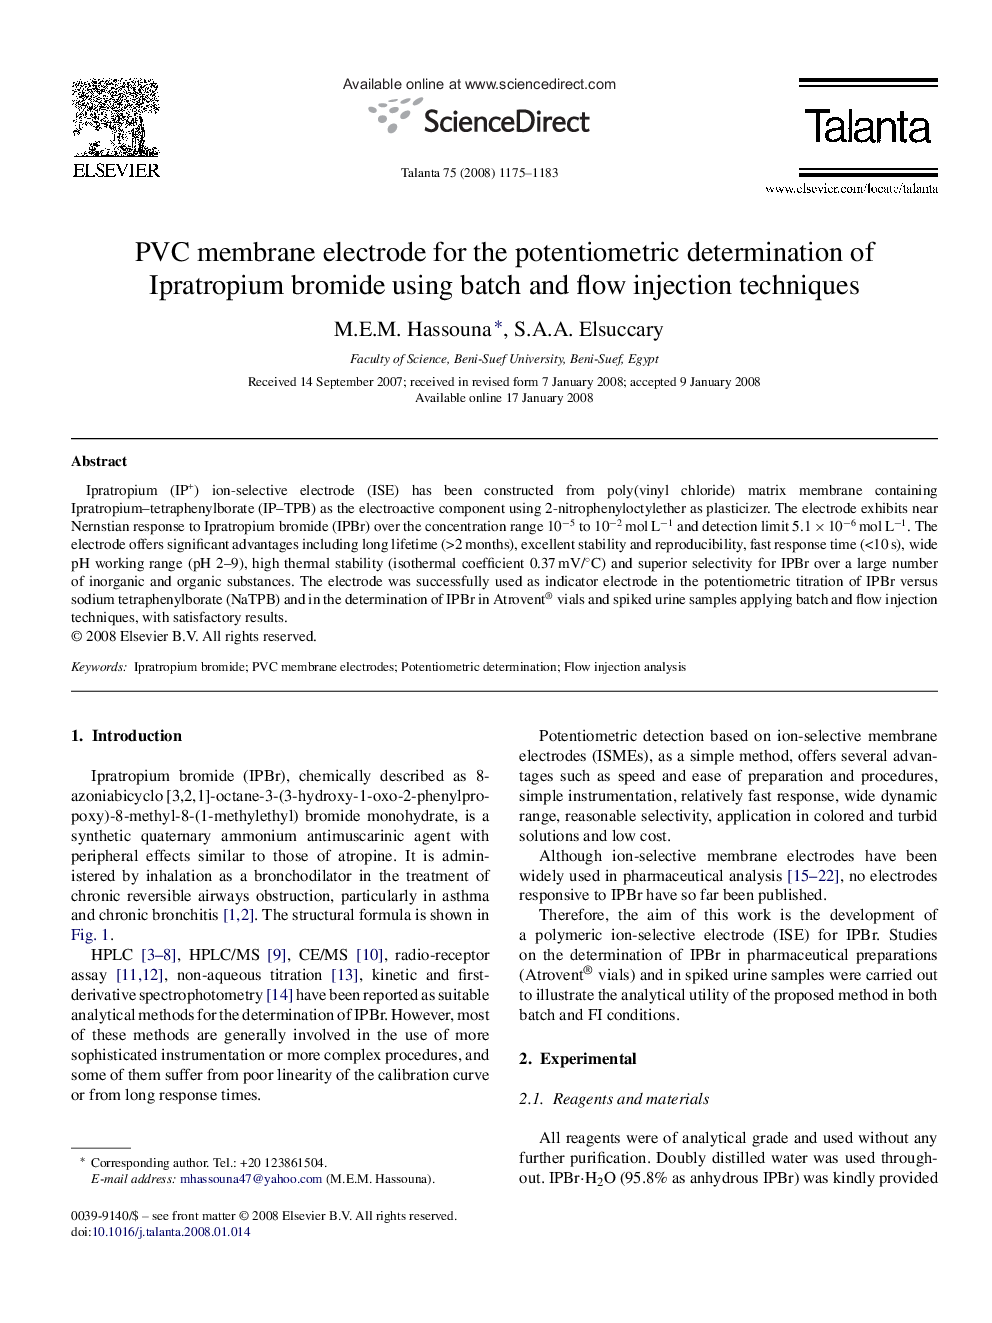 PVC membrane electrode for the potentiometric determination of Ipratropium bromide using batch and flow injection techniques